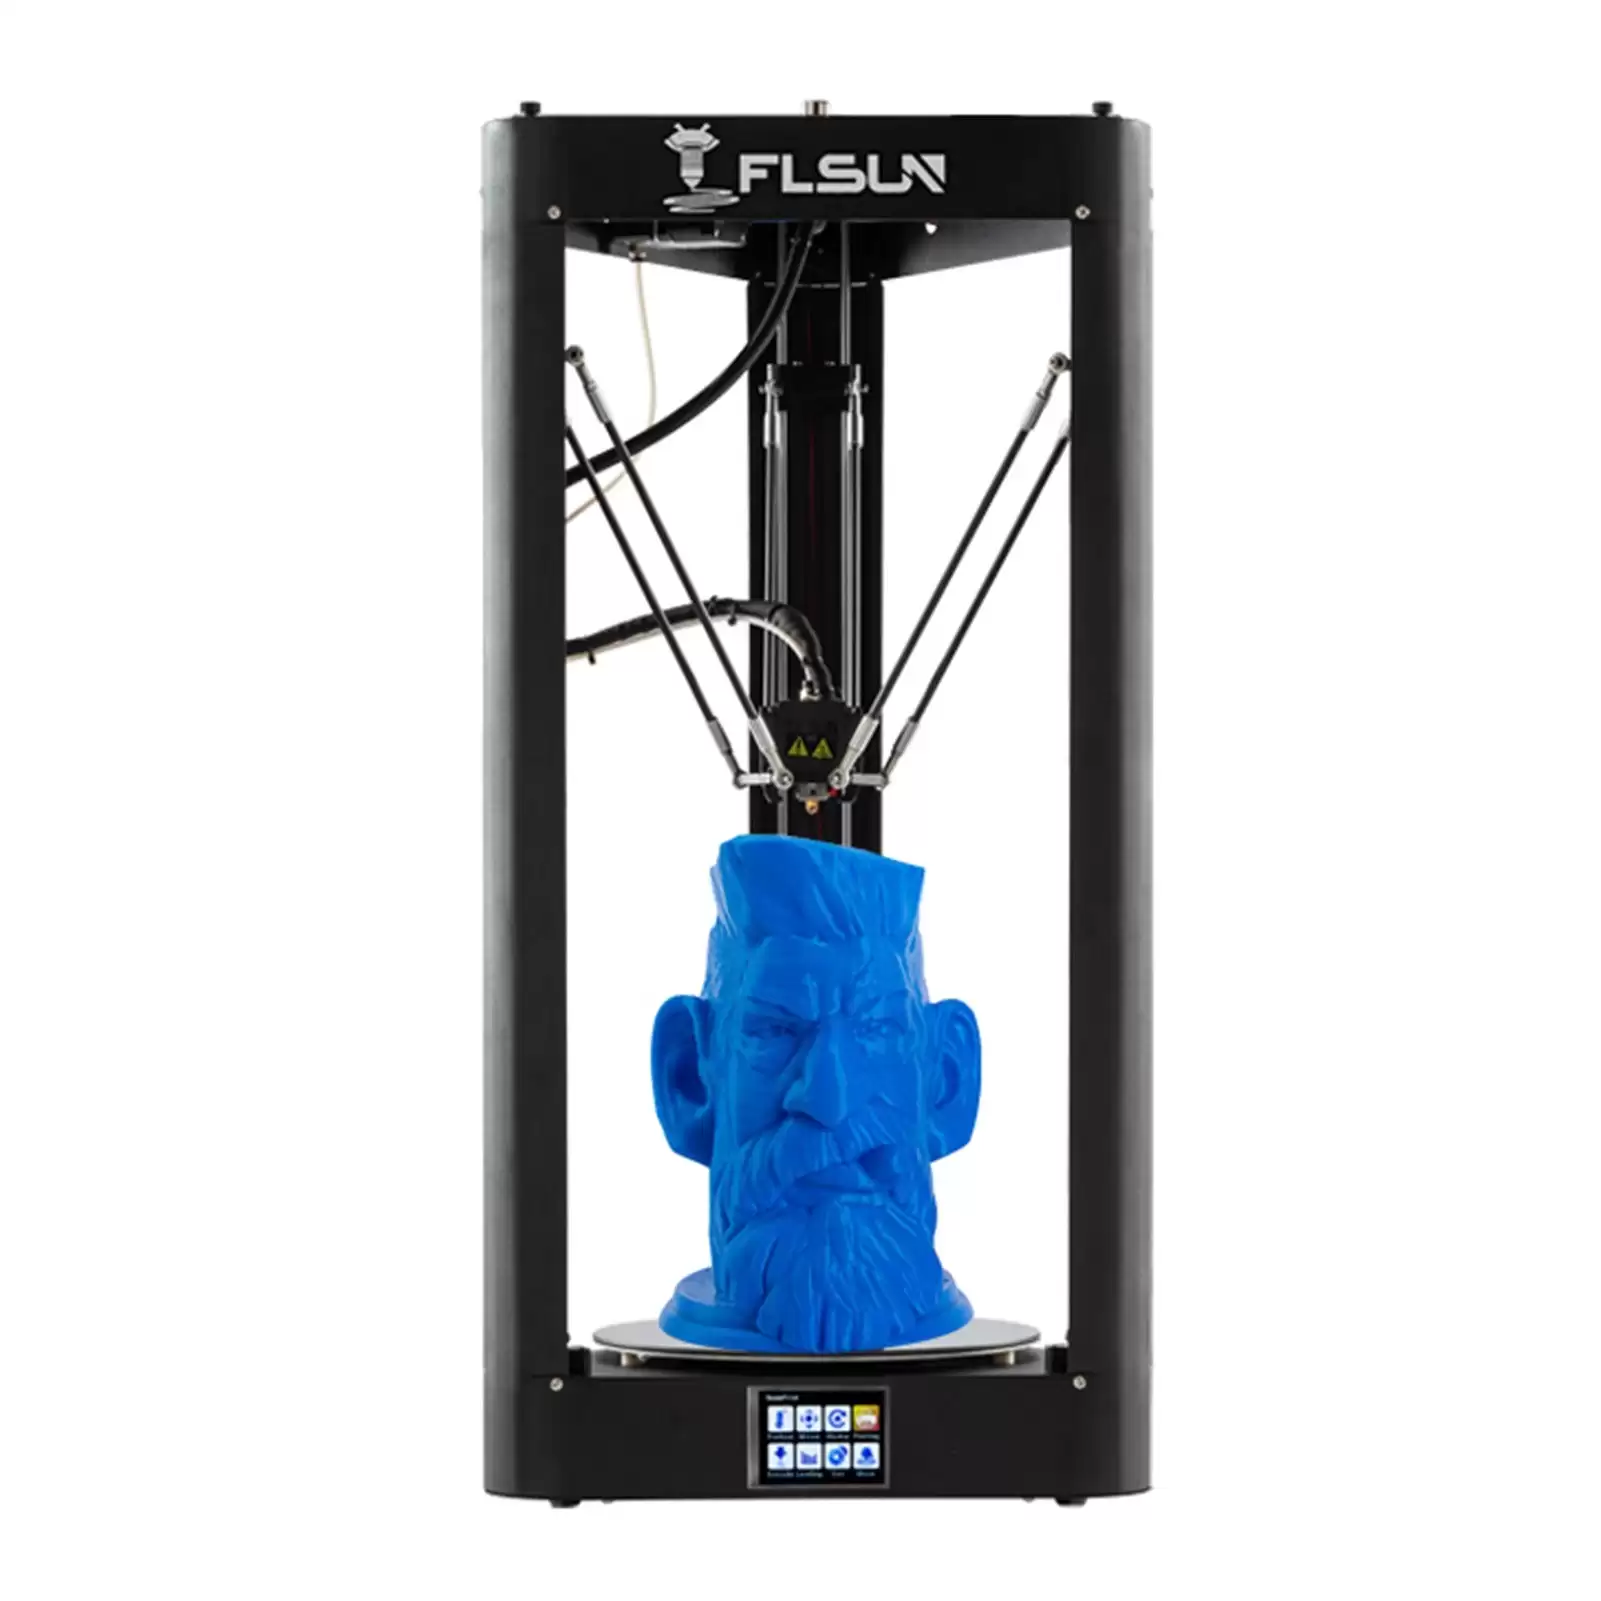 Get $165 Discount On Flsun Qq-S-Pro Delta 3d Printer, Free Shipping $289 (Inclusive Of Vat) At Tomtop